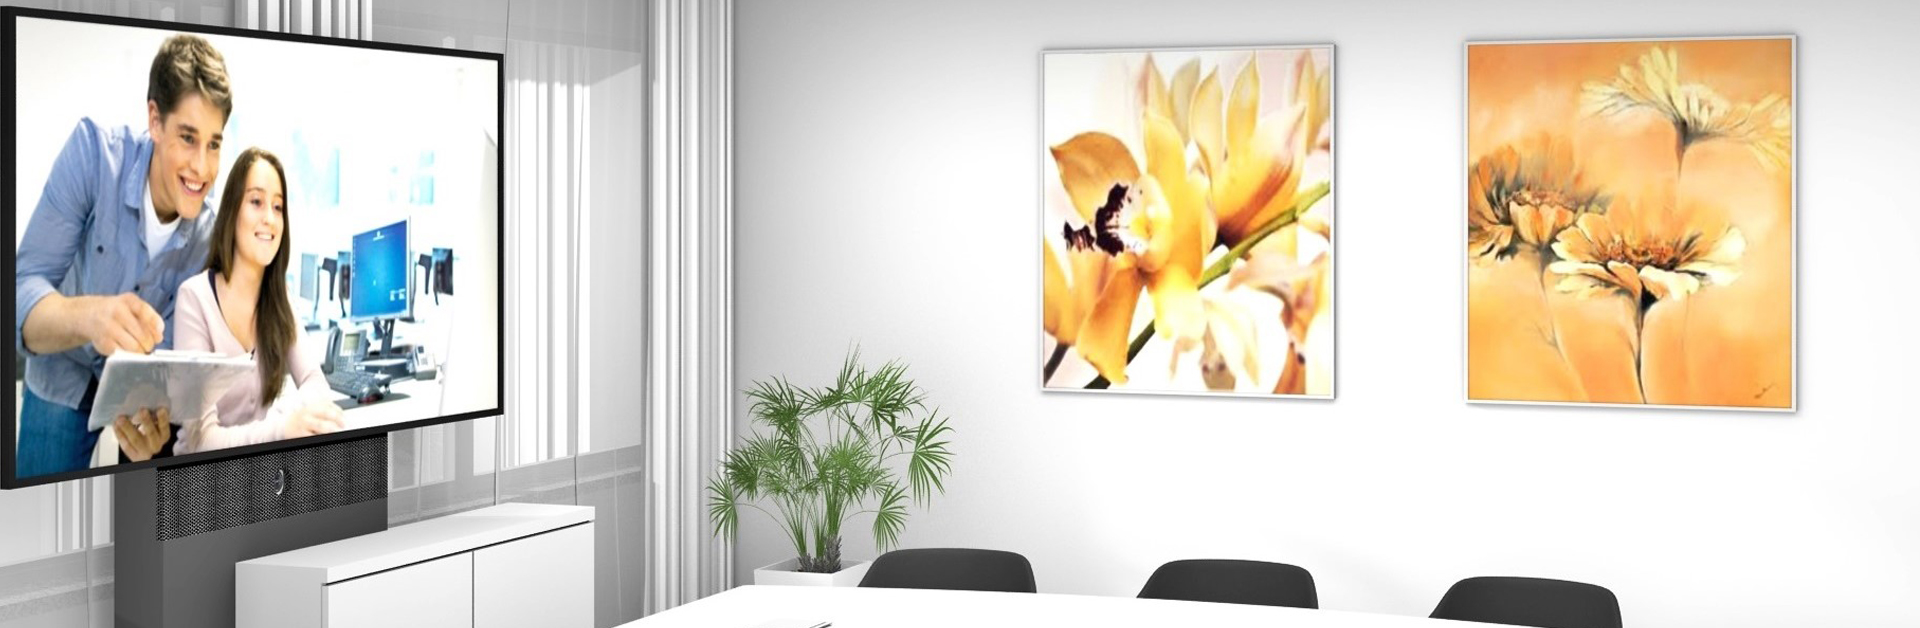 Header: 3D visualisation media stele with display in a conference room with meeting table